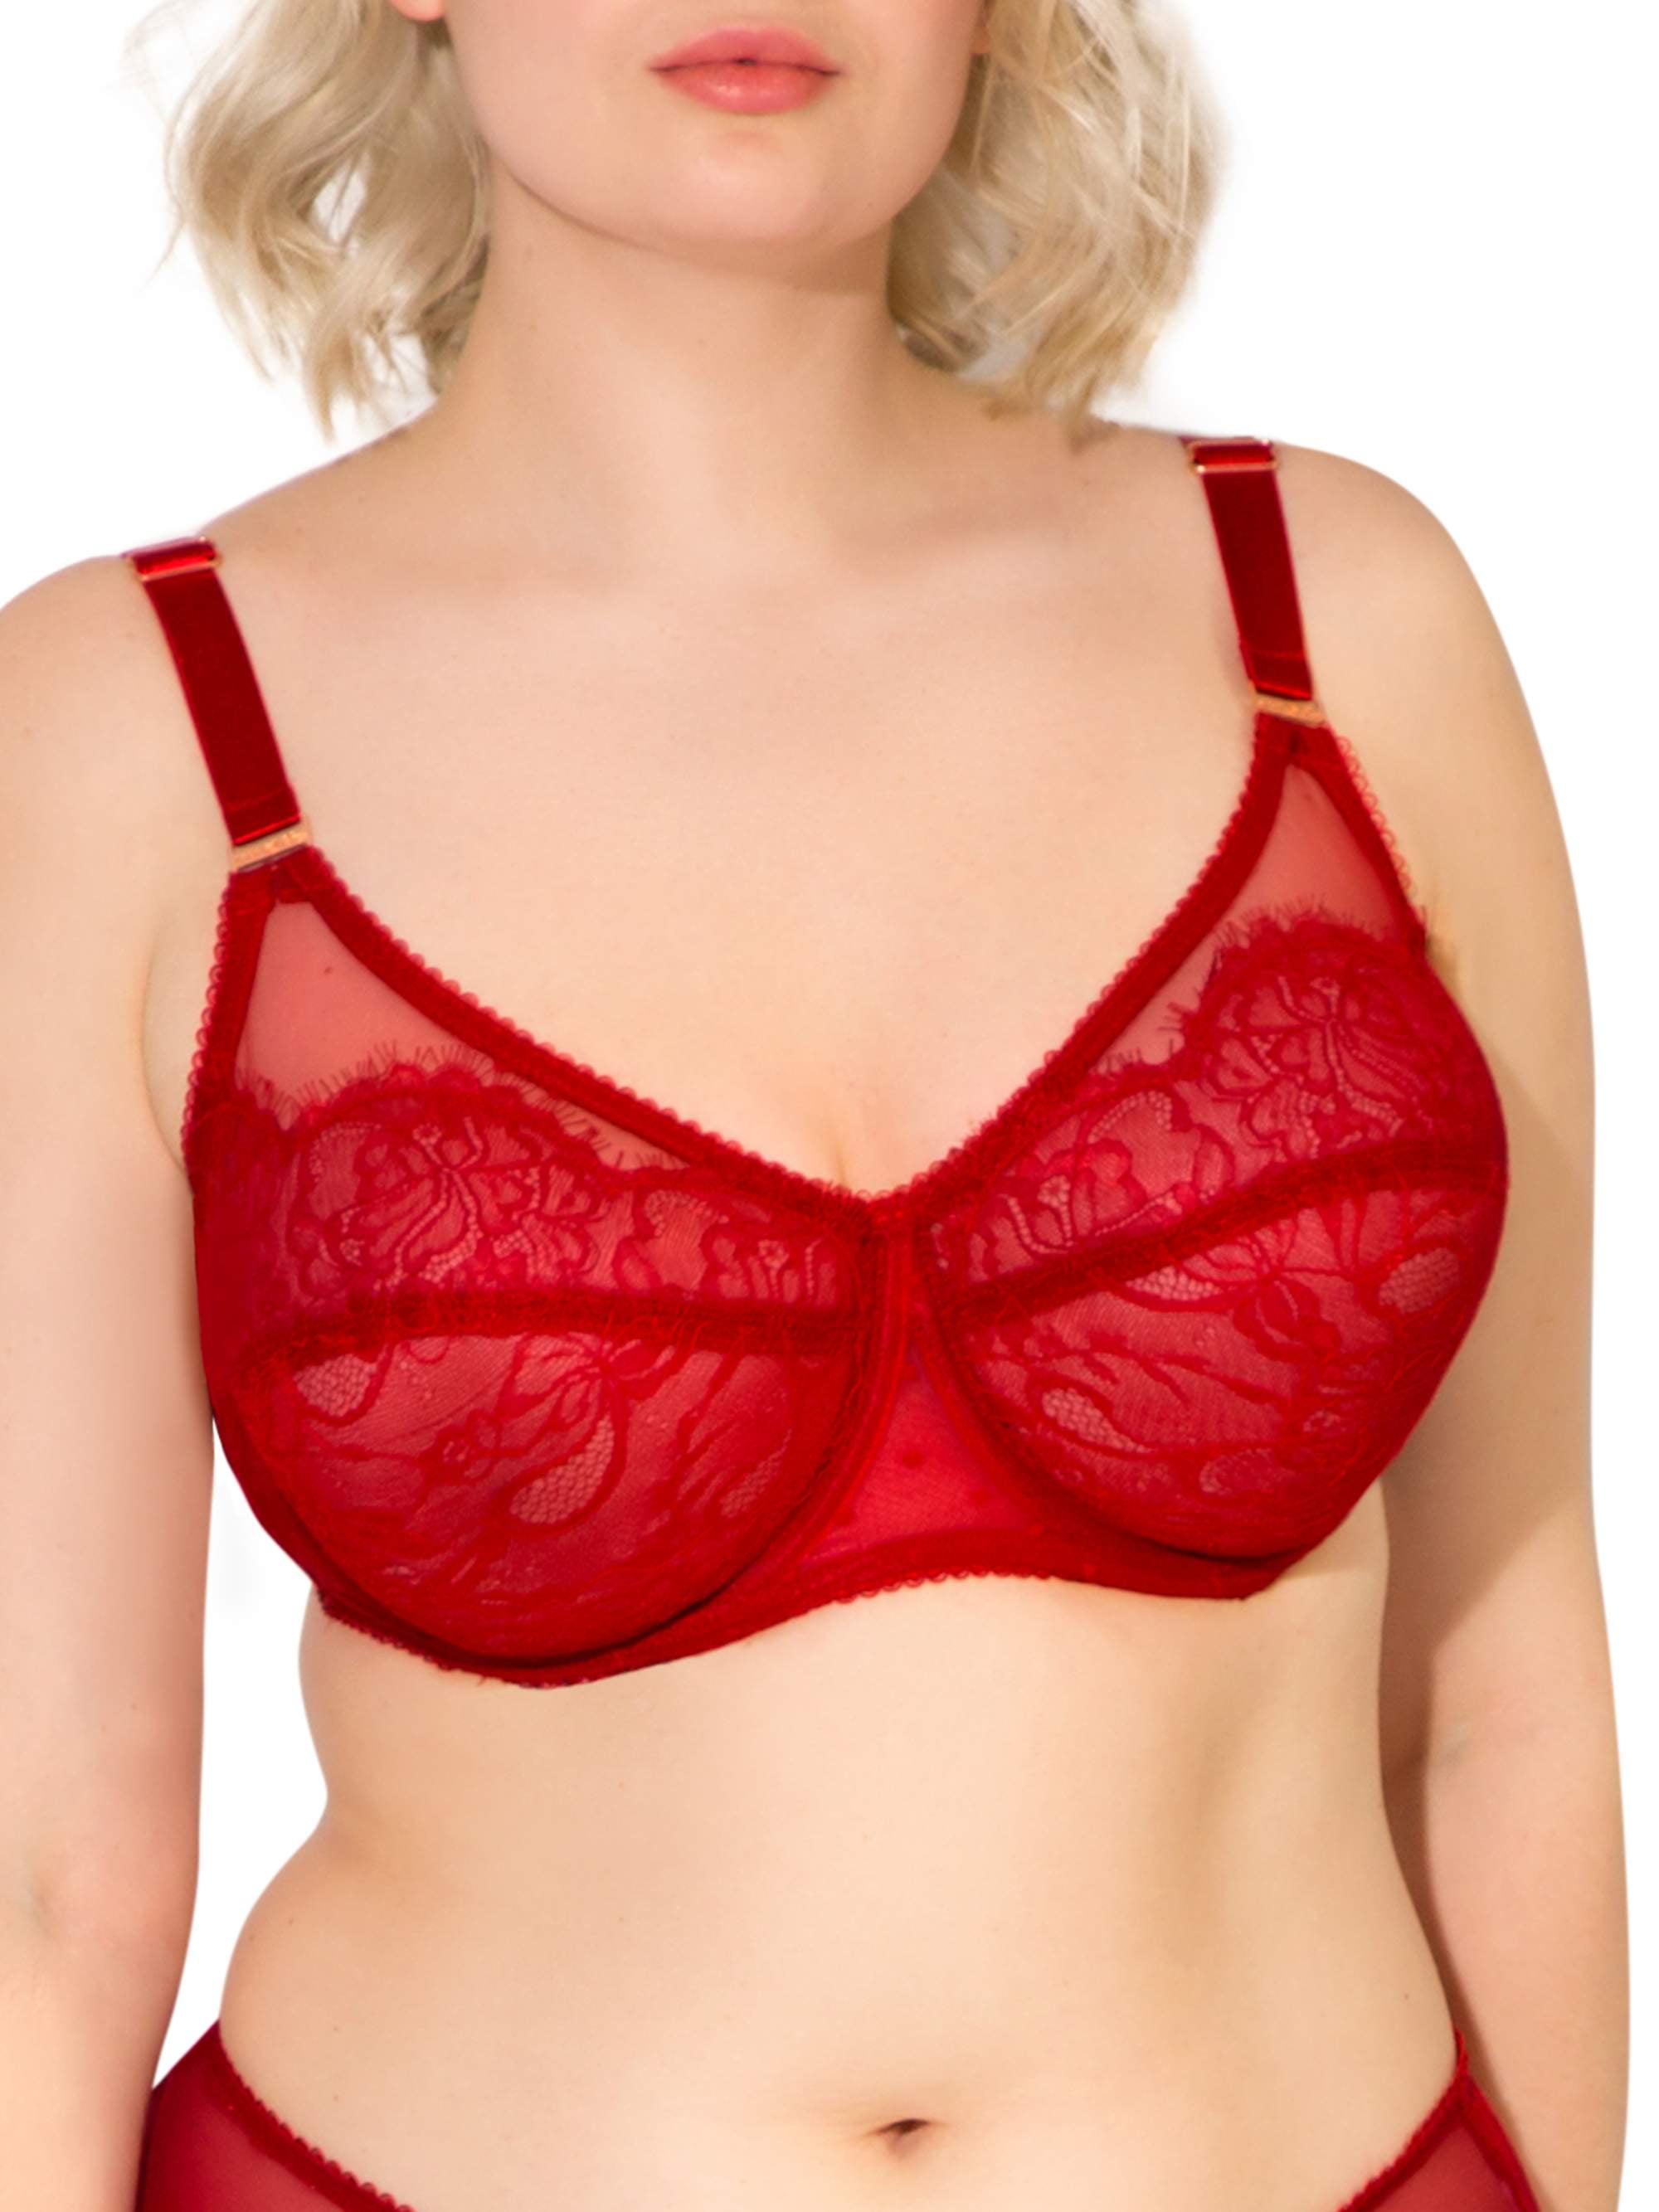 Smart And Sexy Smart And Sexy Womens Plus Size Lace And Mesh Underwire Bra Style Sa1017 Walmart 